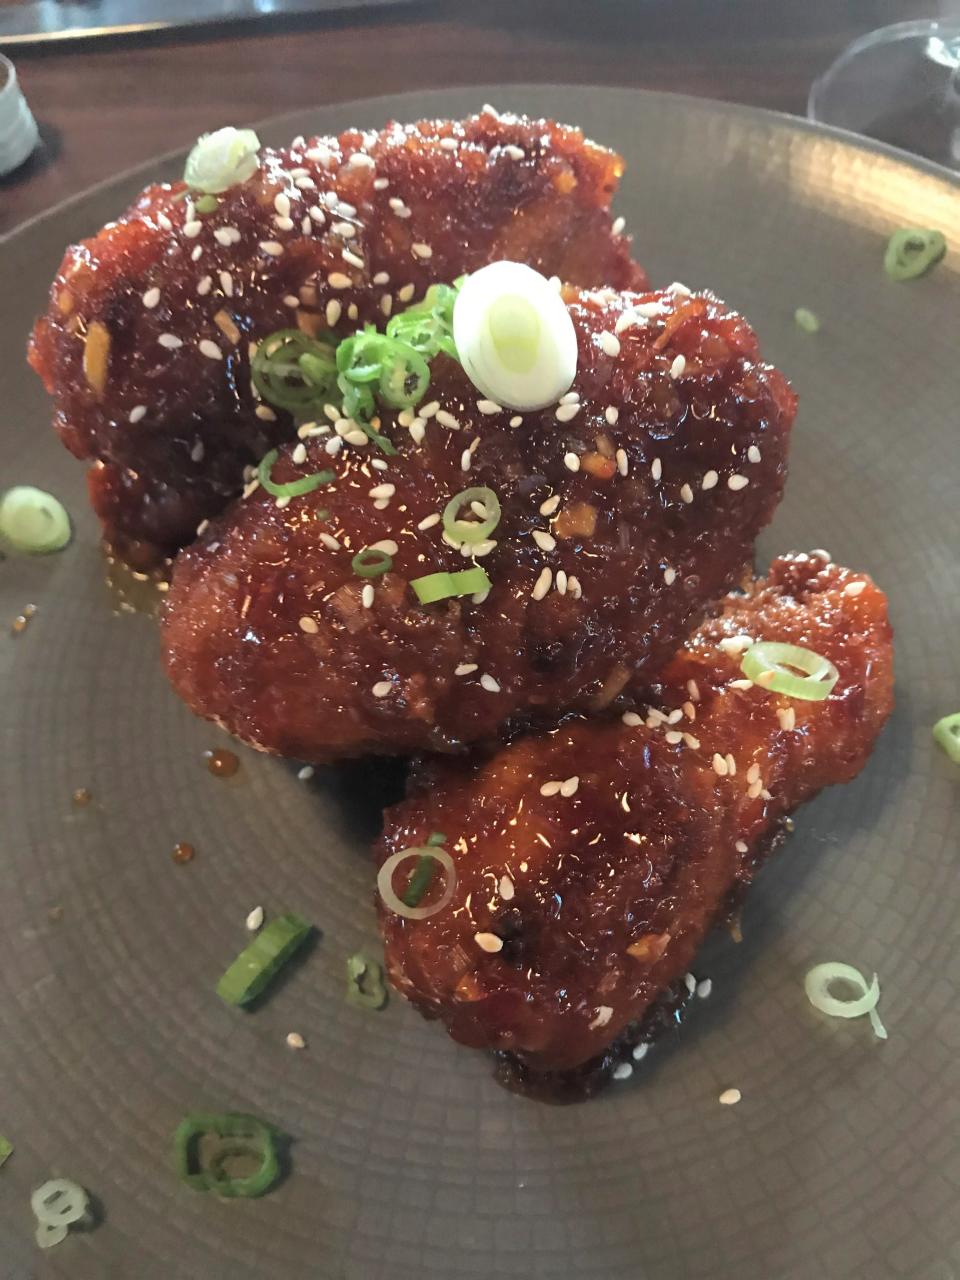 REDD wings with Thai chili glaze and sesame seeds are among the dishes in the restaurant's takeout menu.